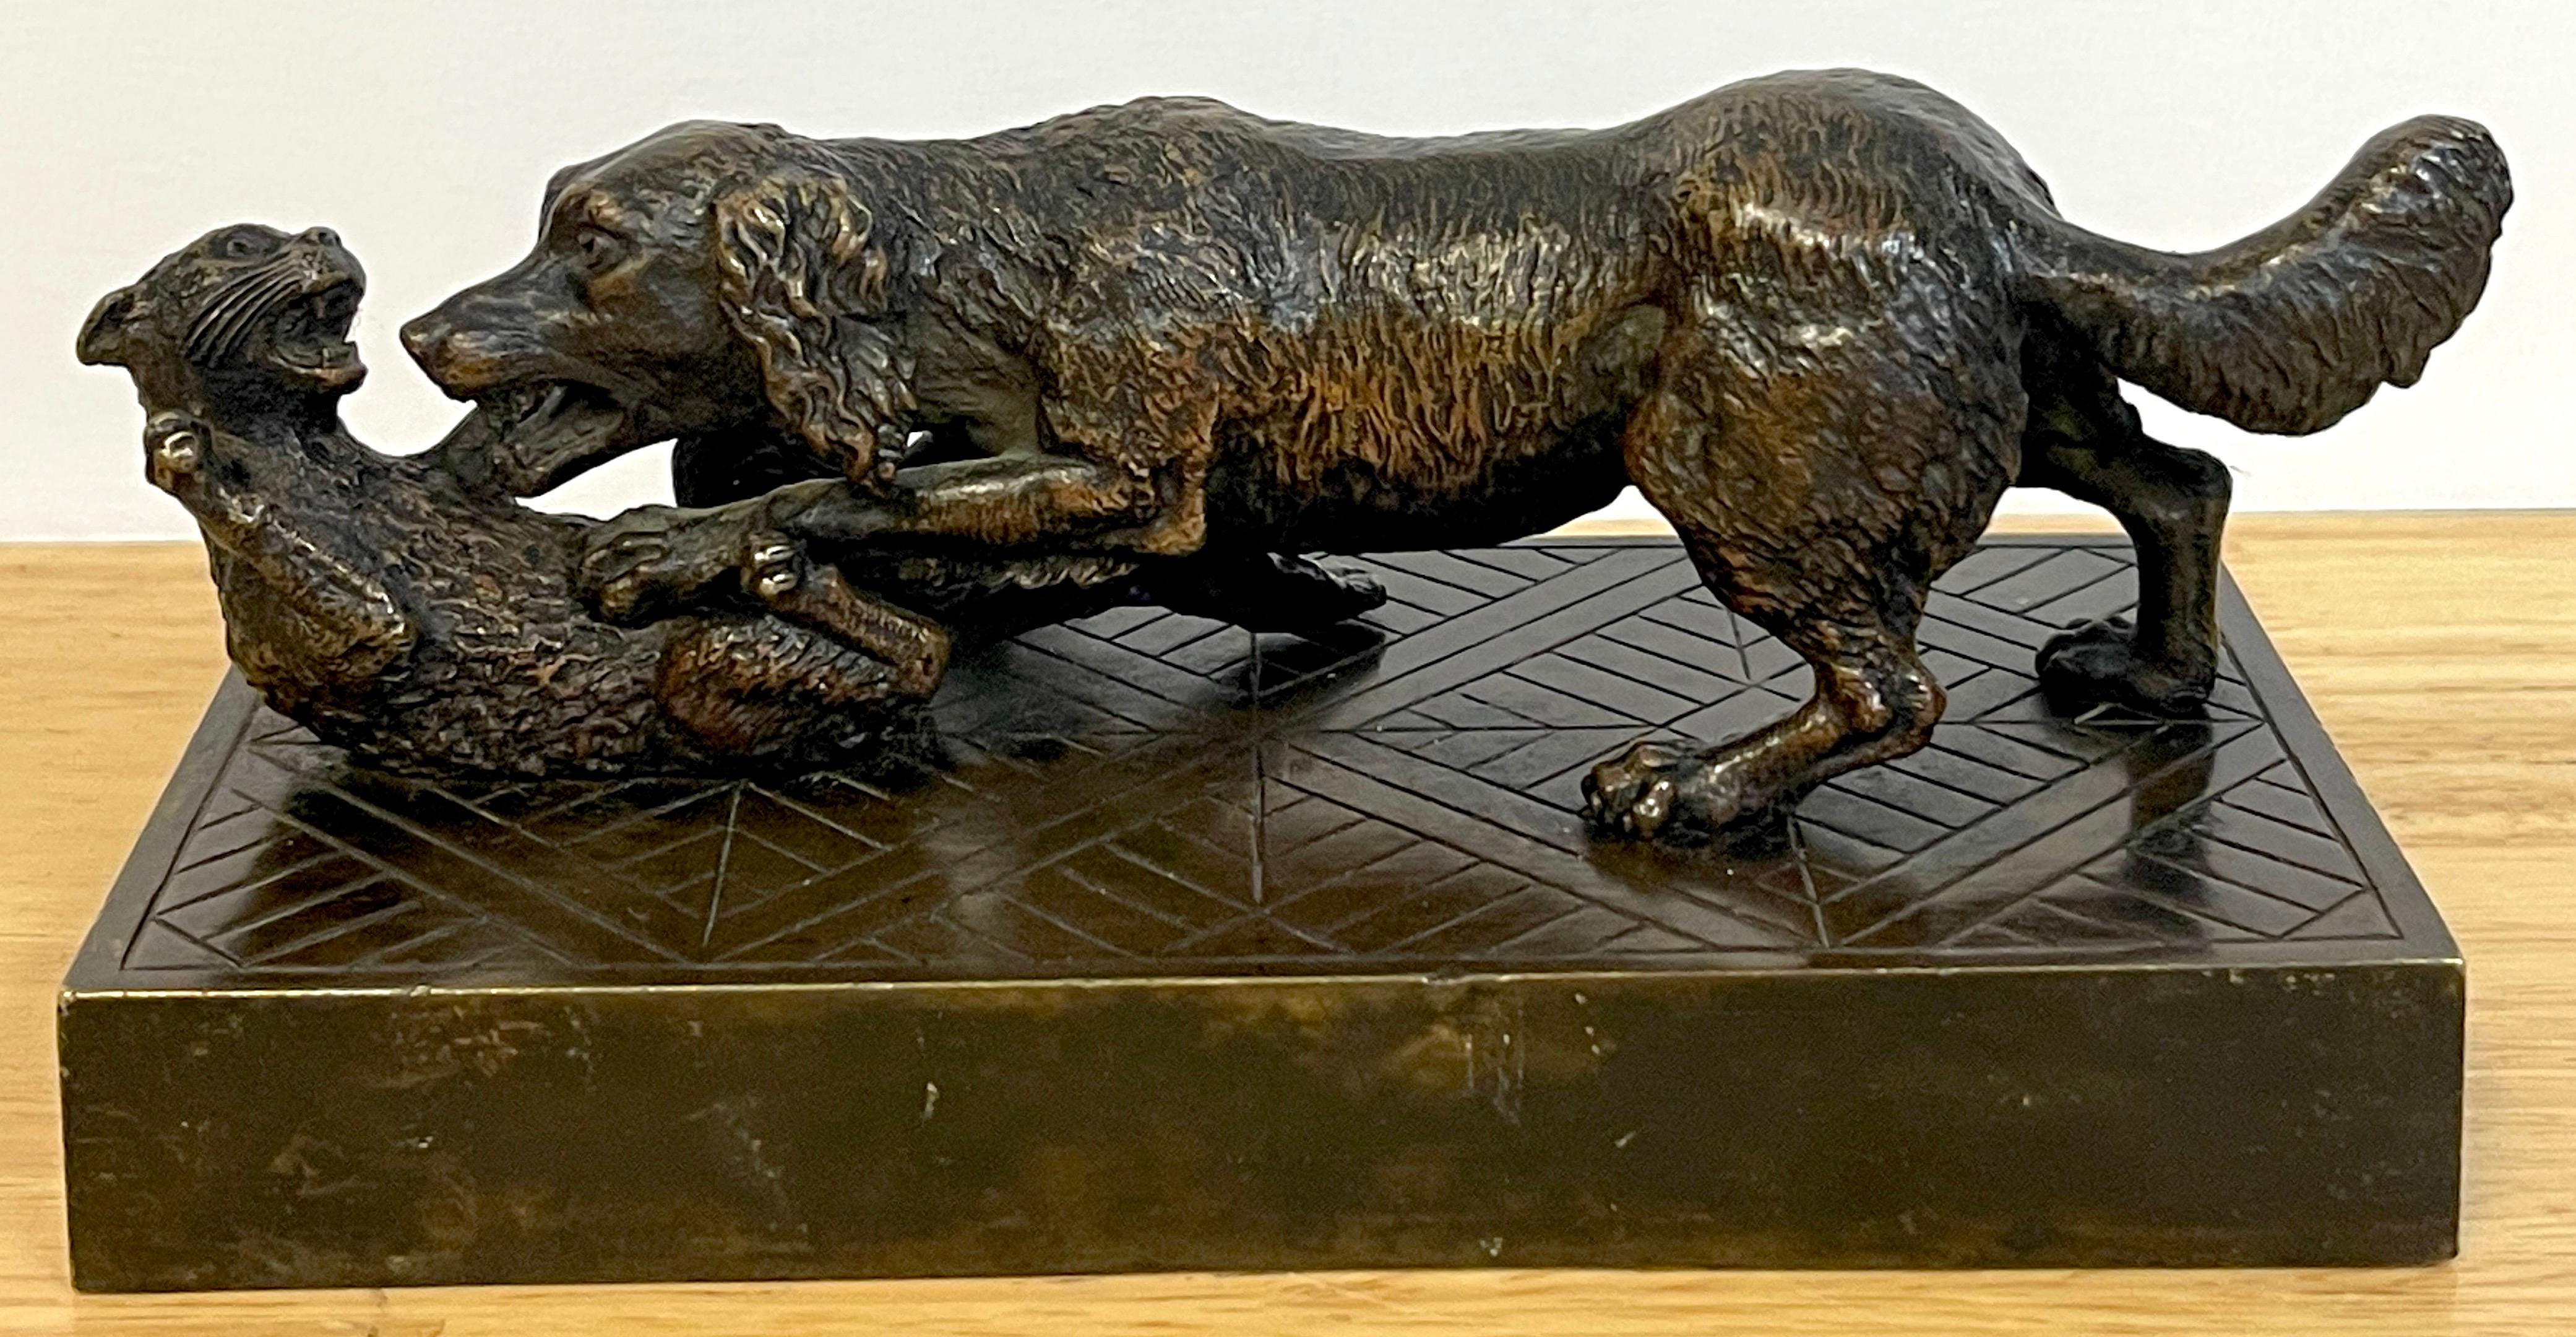 Napoleon III whimsical bronze of a playful dog & cat, Nice detail, fine casting of a dog and cat engaged in play on incised brick floor, unsigned. 



